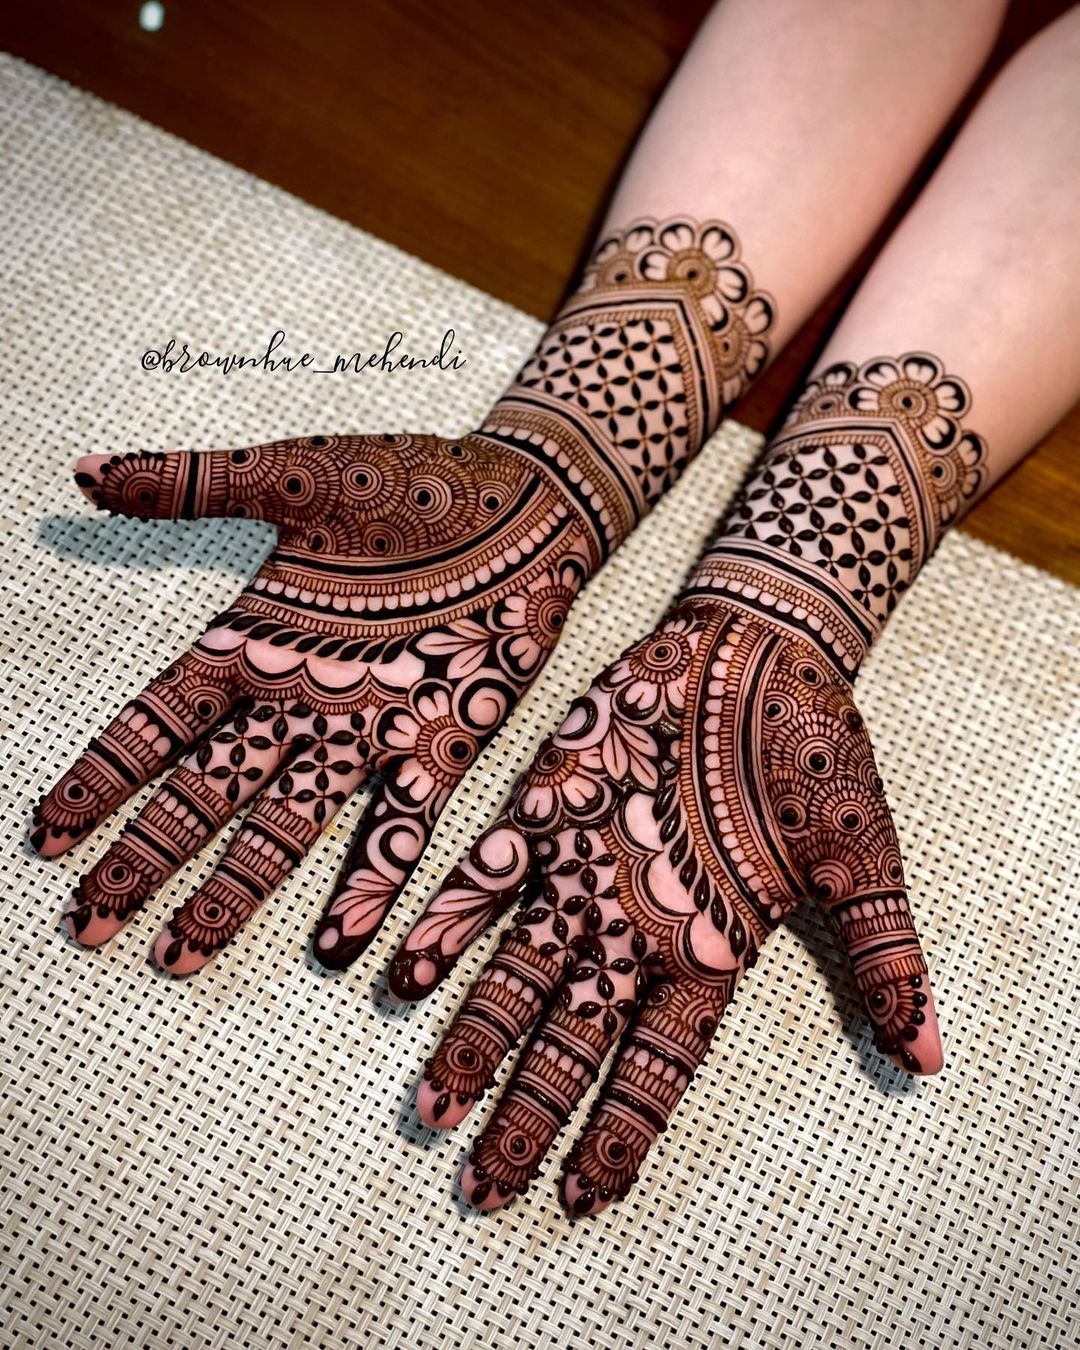 Full 4K Collection of Over 999+ Amazing Simple Mehndi Design Images